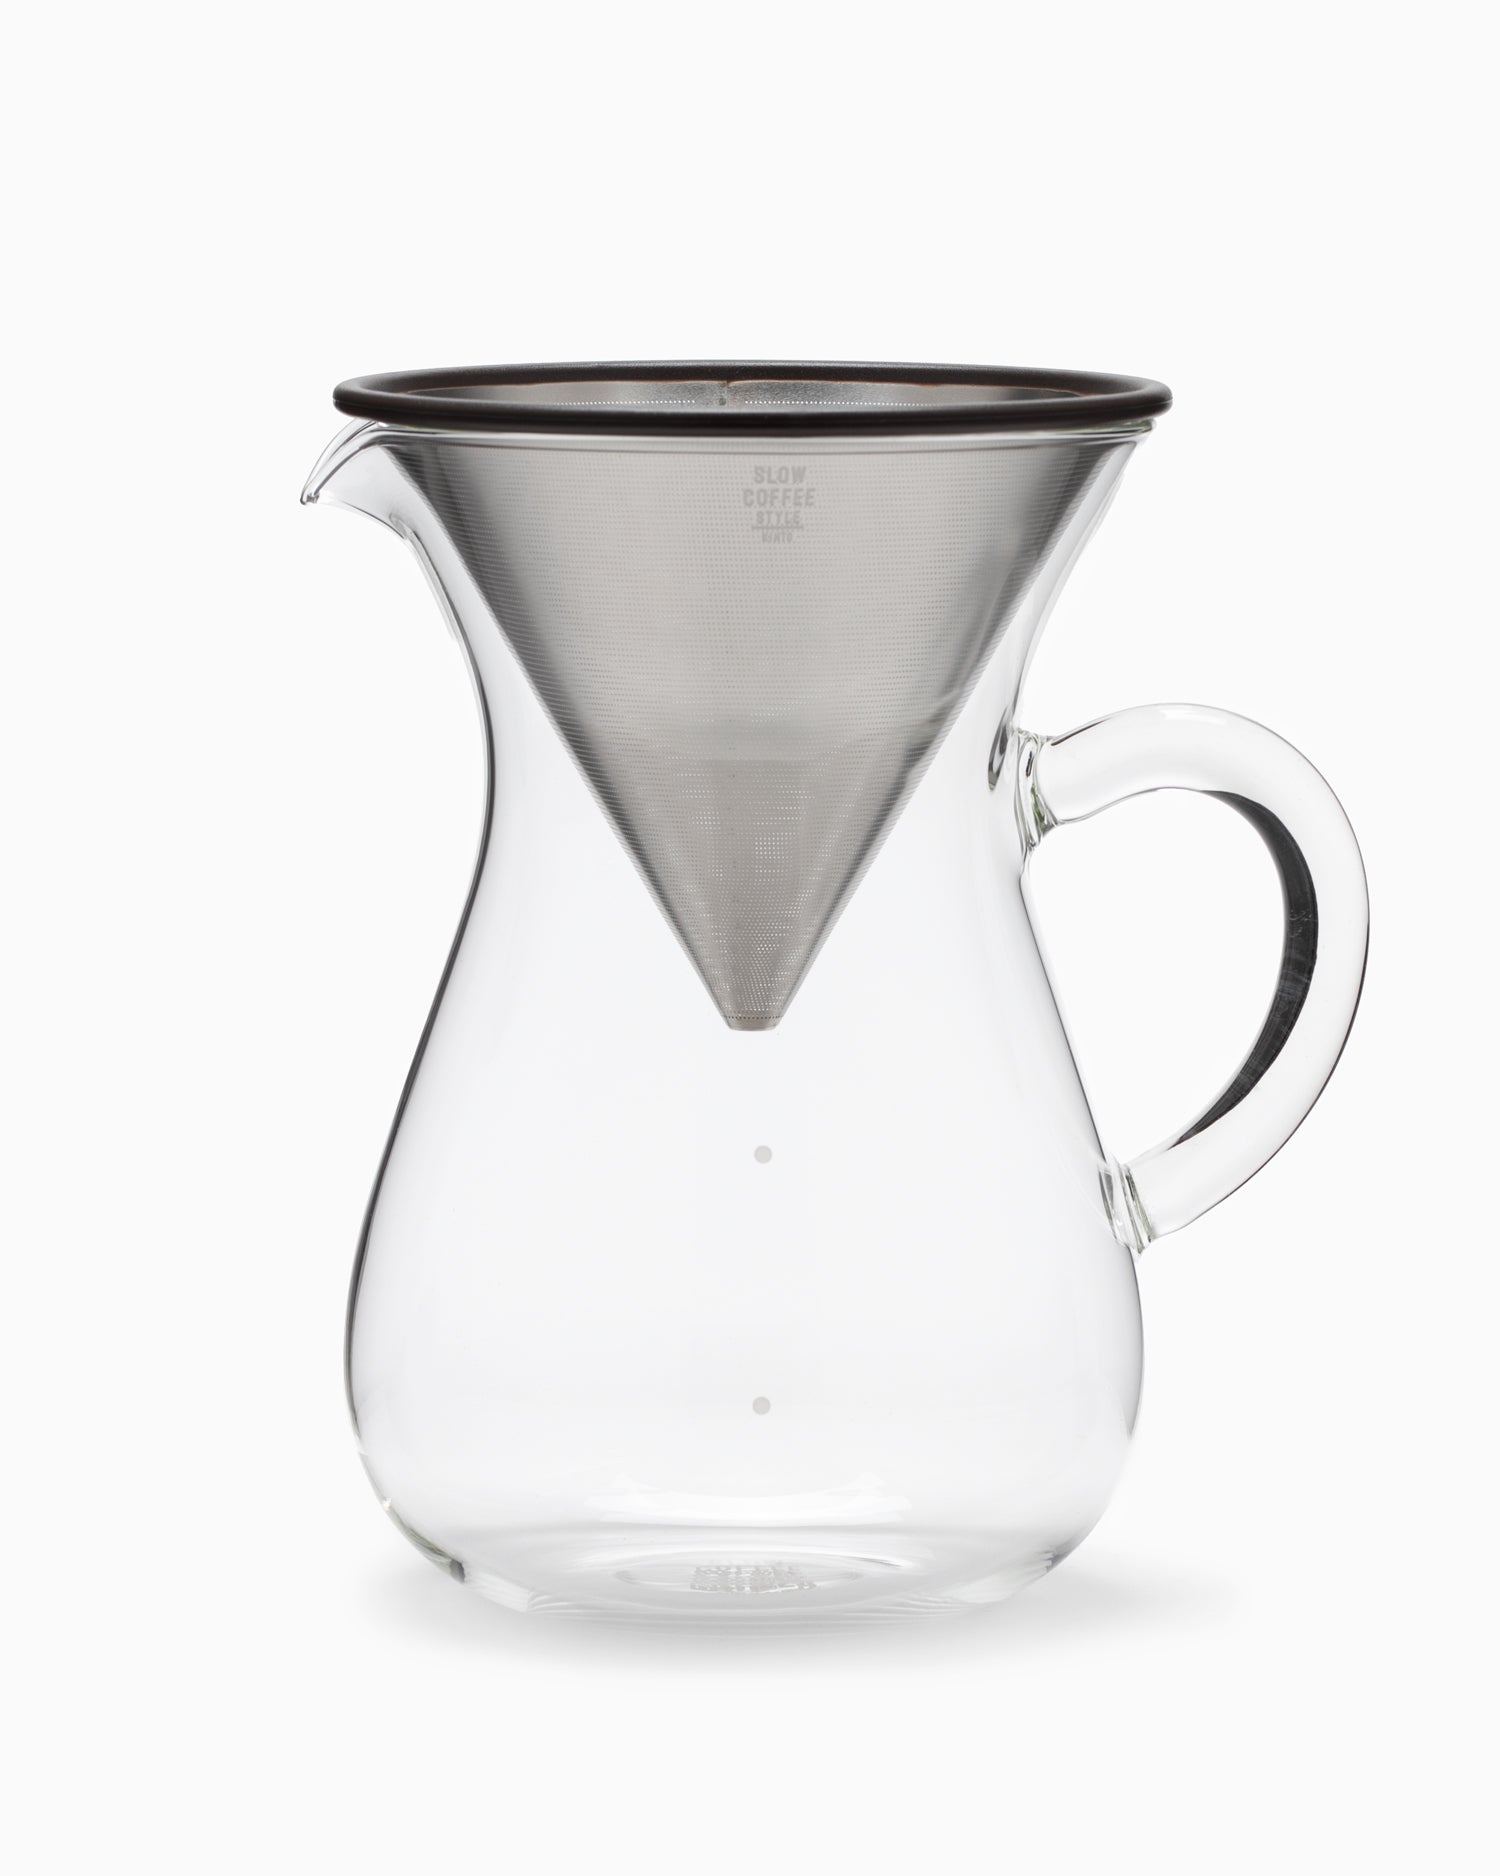 SCS Coffee Carafe Cups